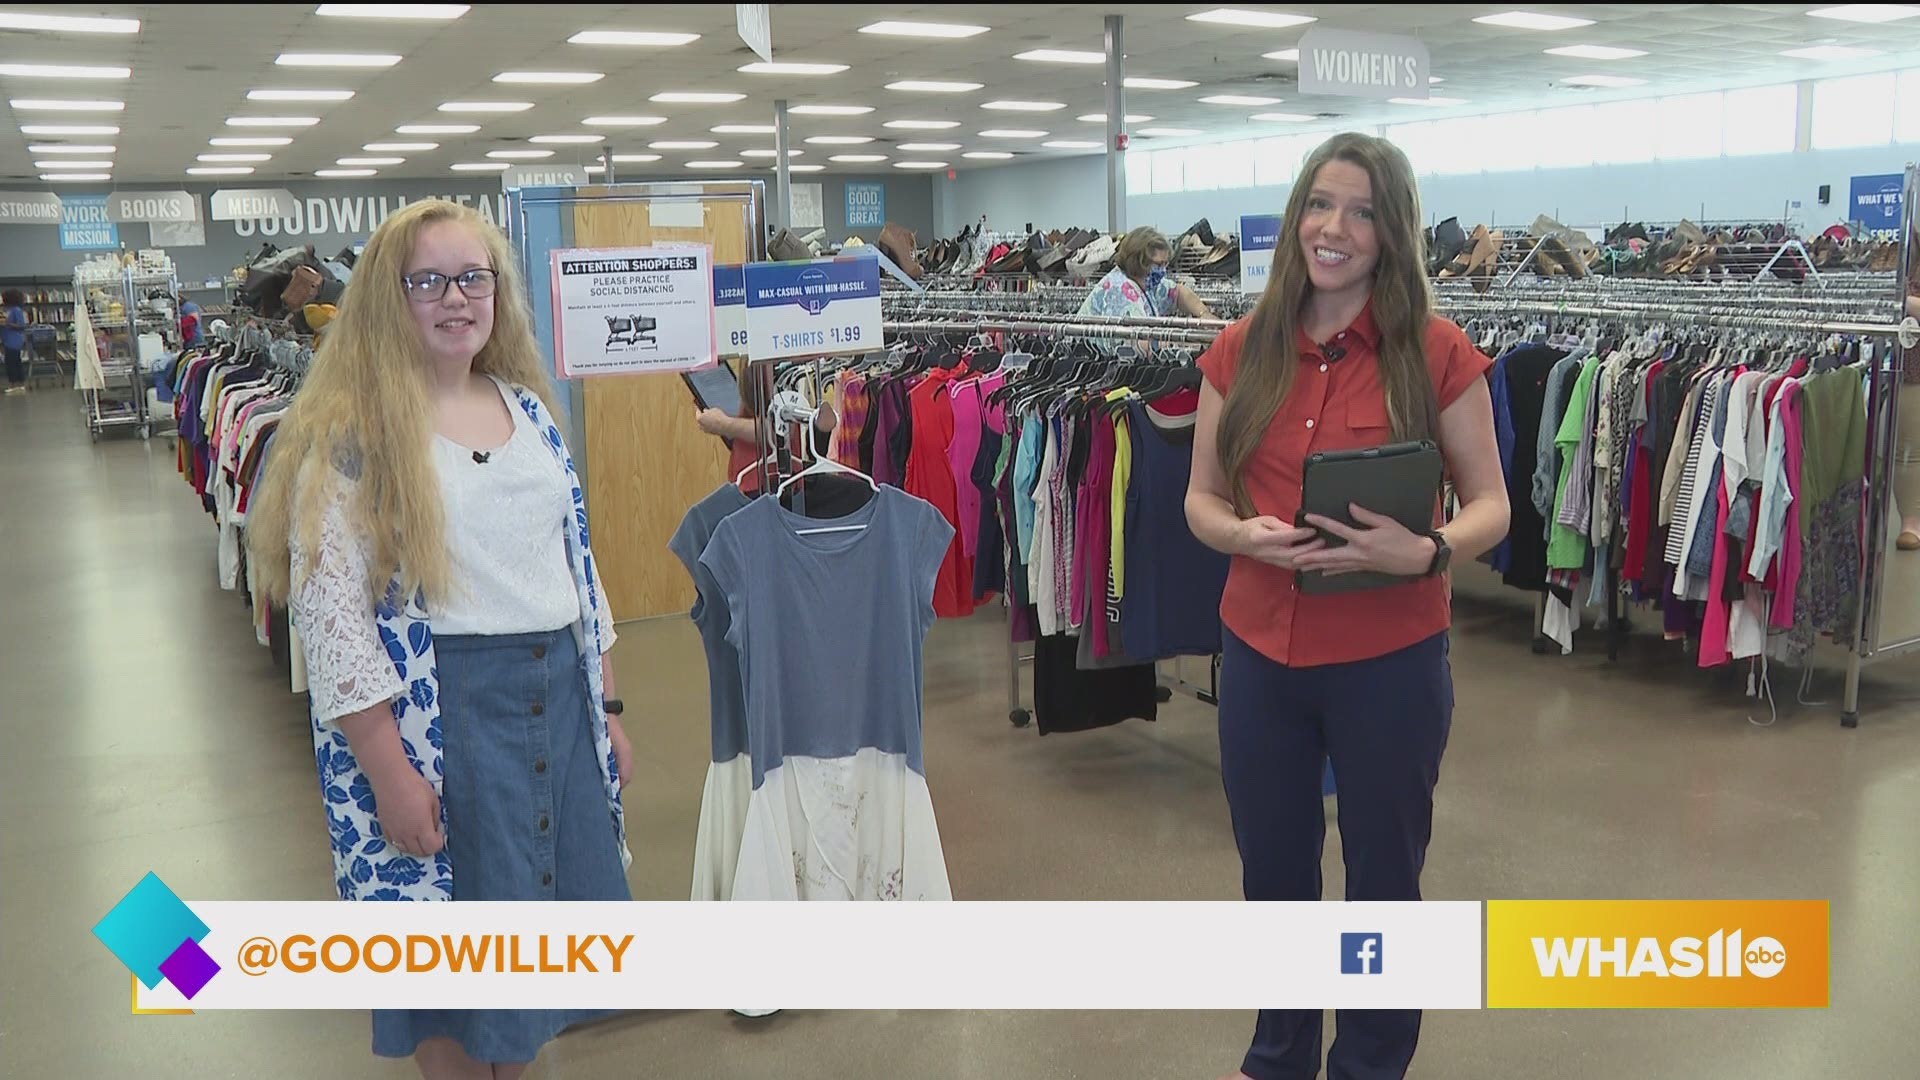 To learn more about the Goodwill Industries of Kentucky, visit GoodwillKY.org.